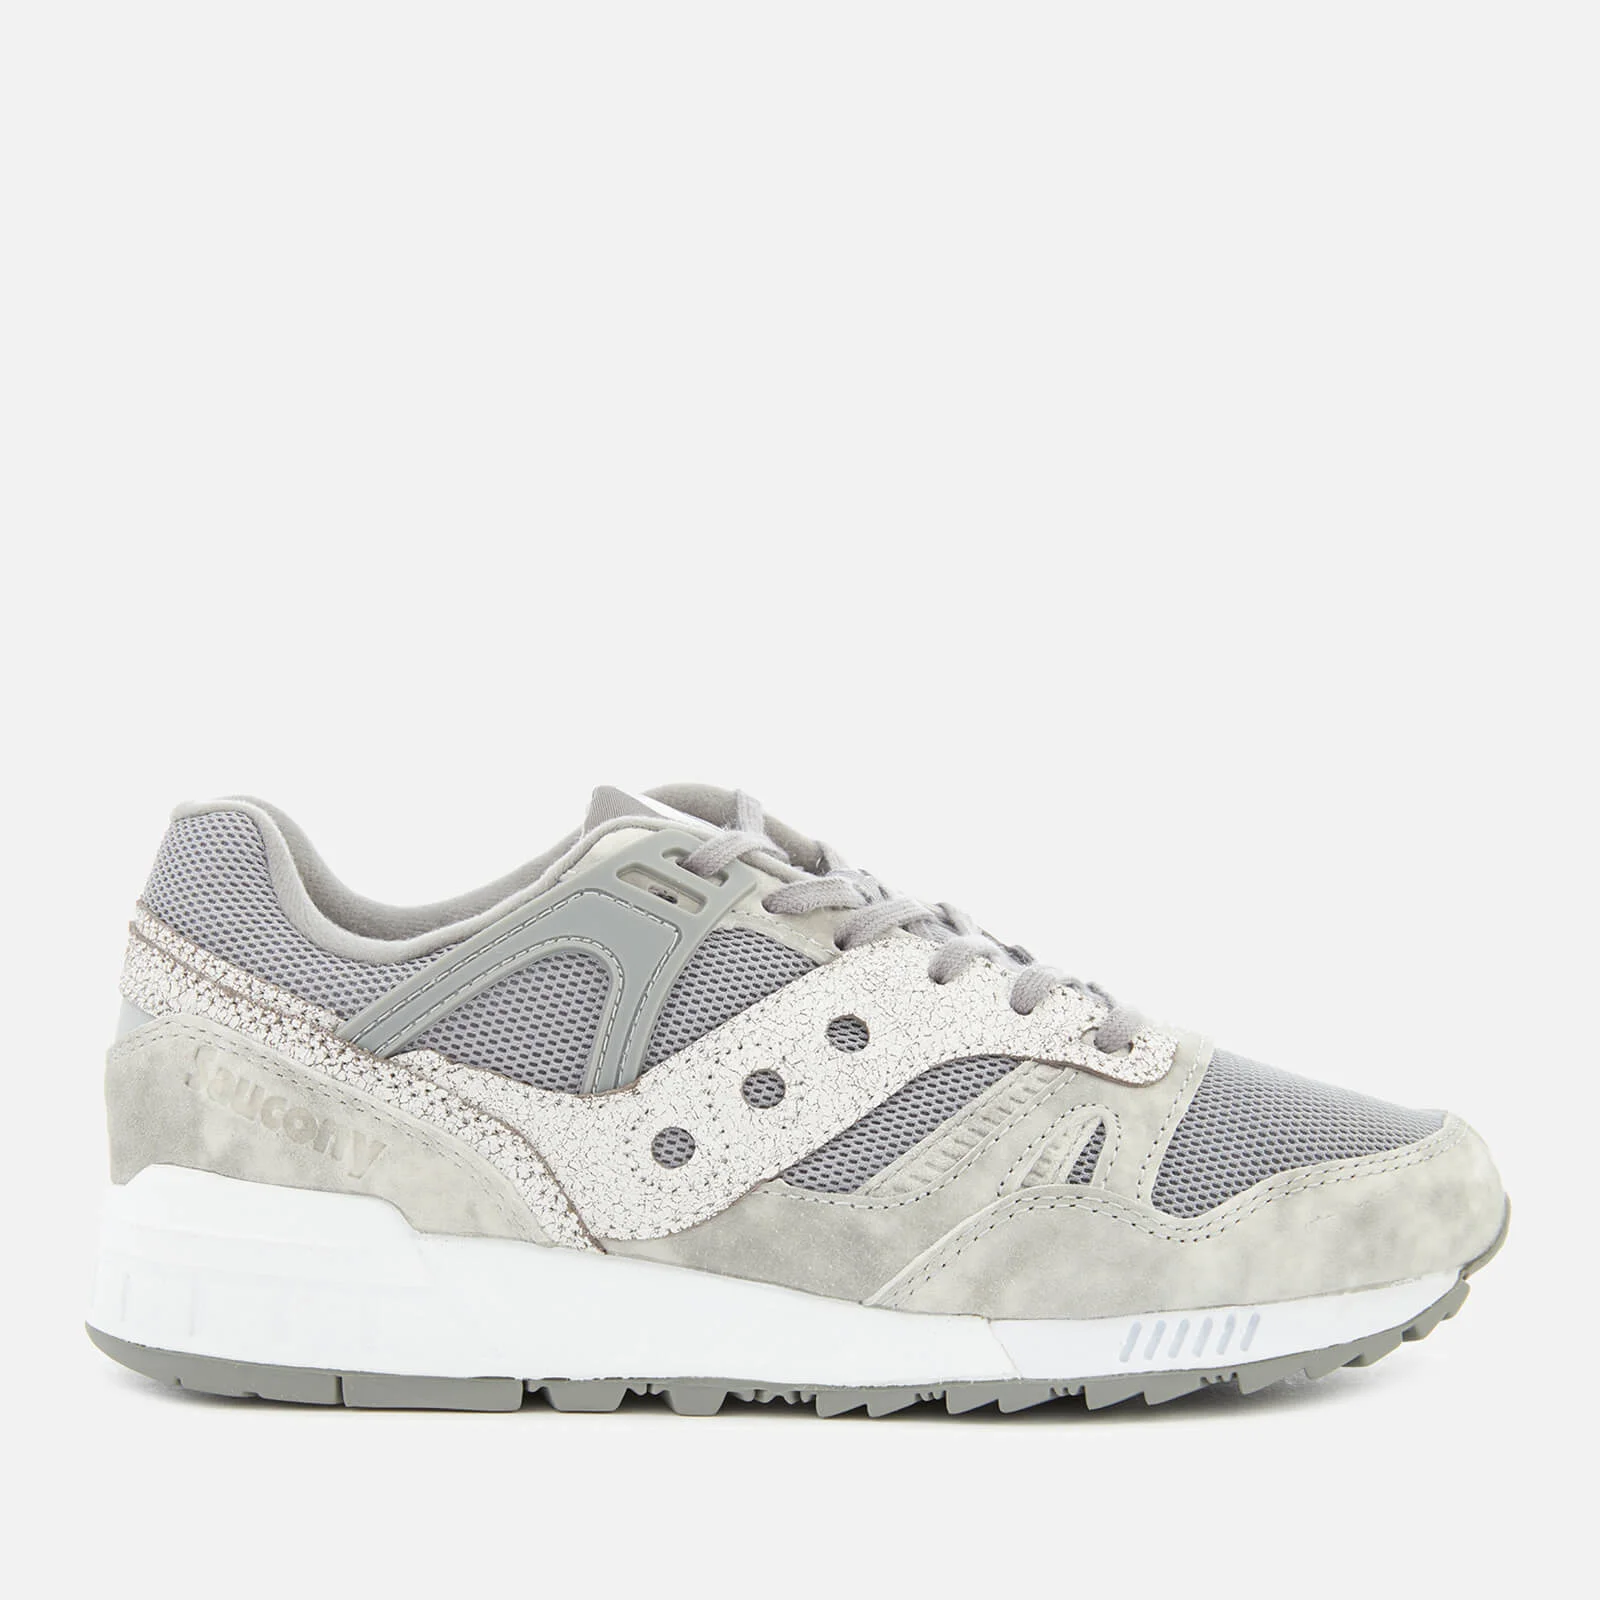 Saucony Men's Grid SD Trainers - Grey/White Image 1